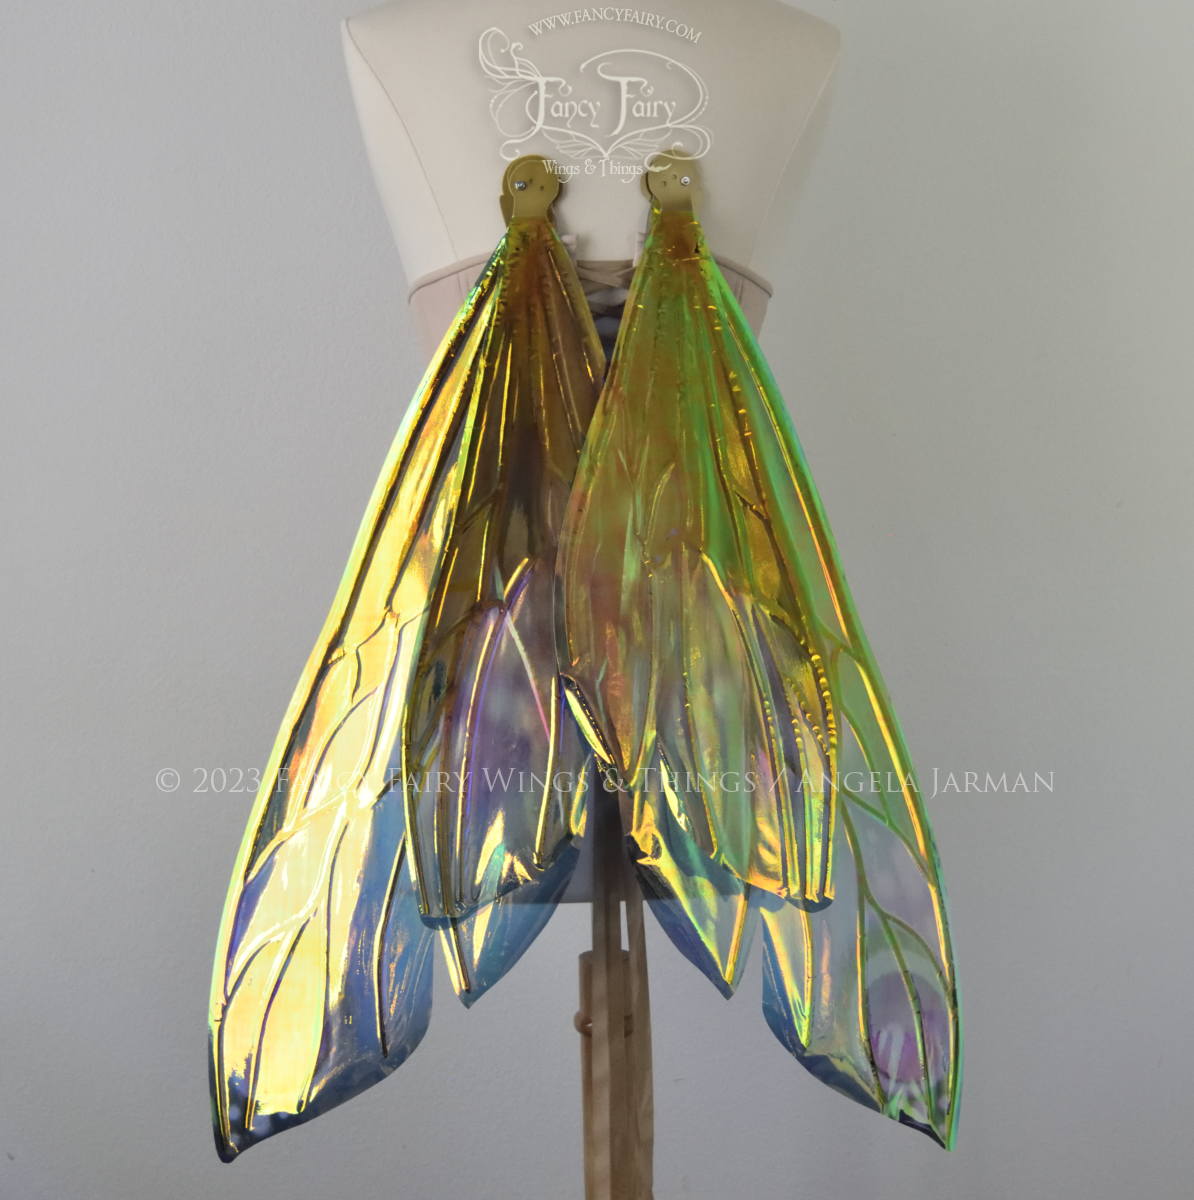 Back view of extra large iridescent fairy wings in various shades of green, teal, blue, lavender with touches of pink, with gold veins, worn on a dress form with underbust corset, wings in resting position